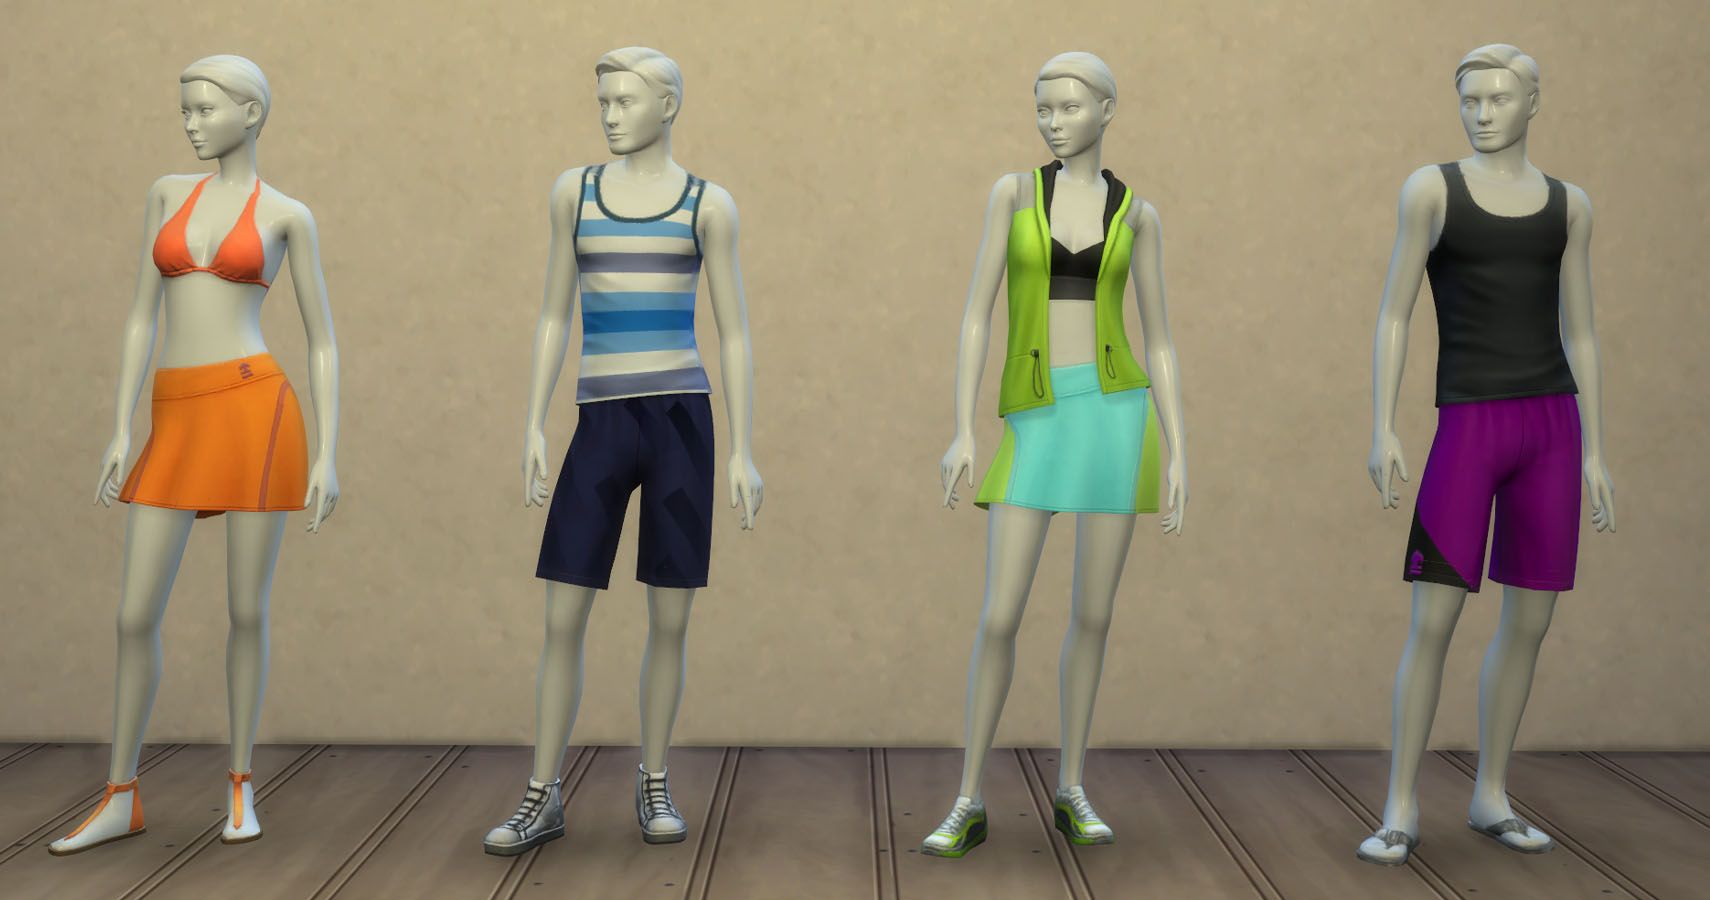 Community Blog: Work Up A Sweat With The Sims 4 Fitness Stuff Pack